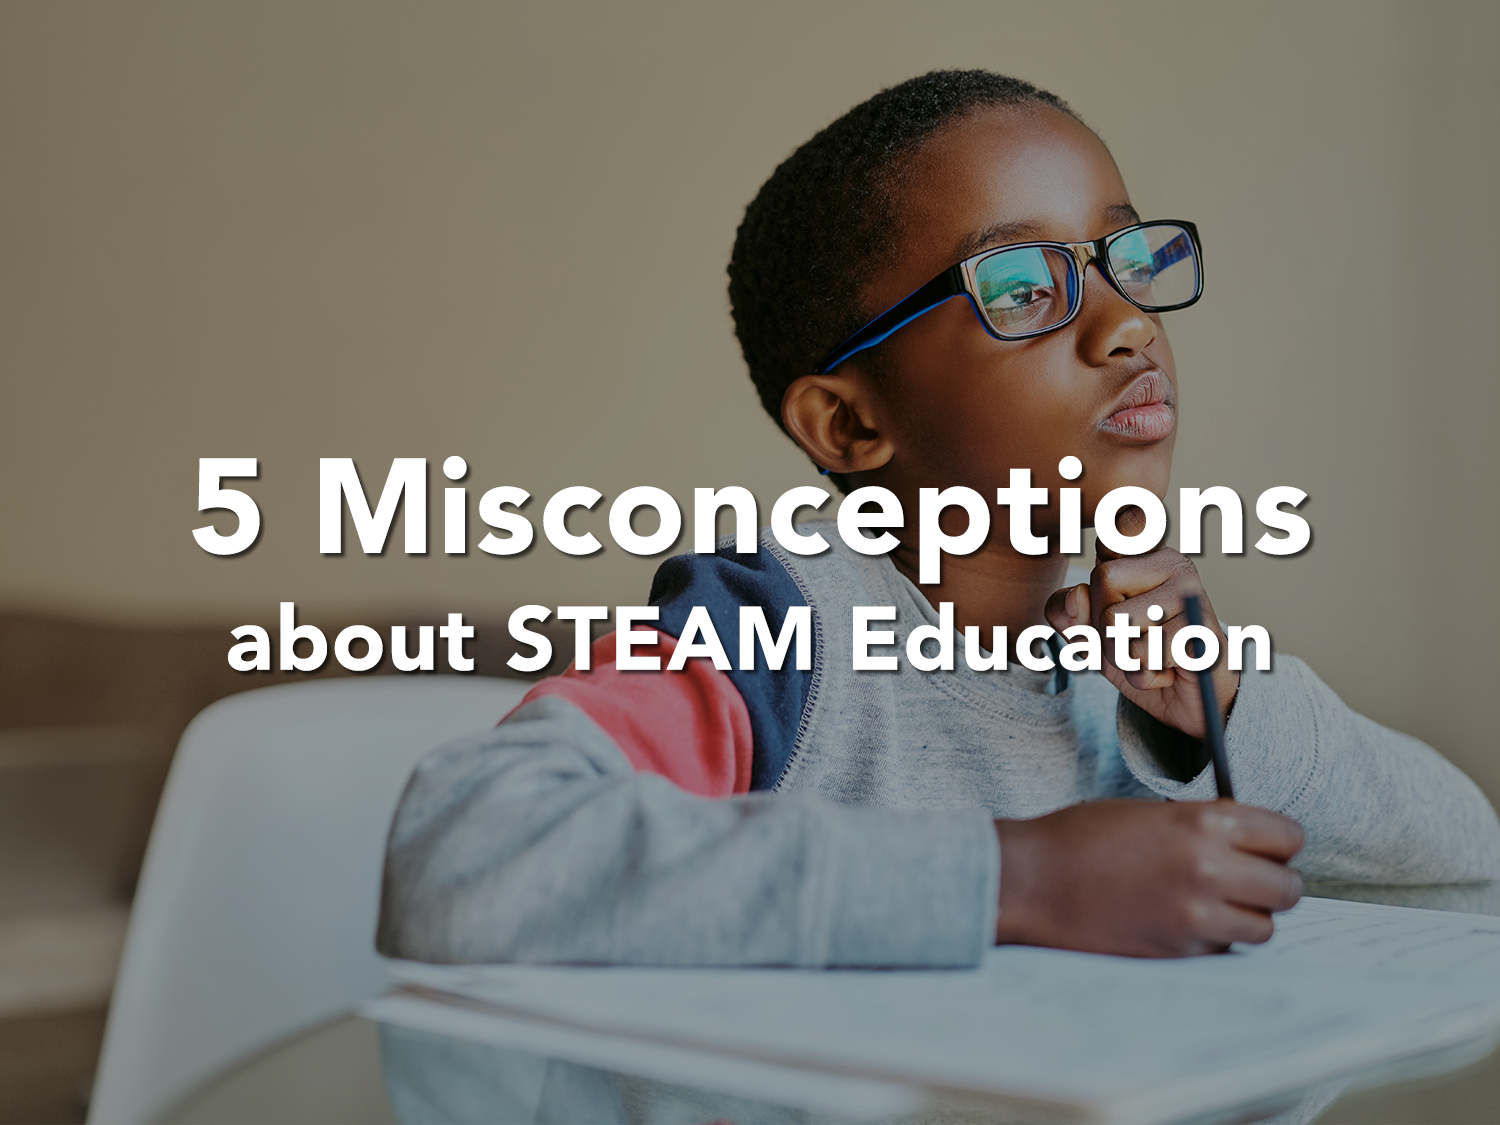 5 Misconceptions about STEAM Education